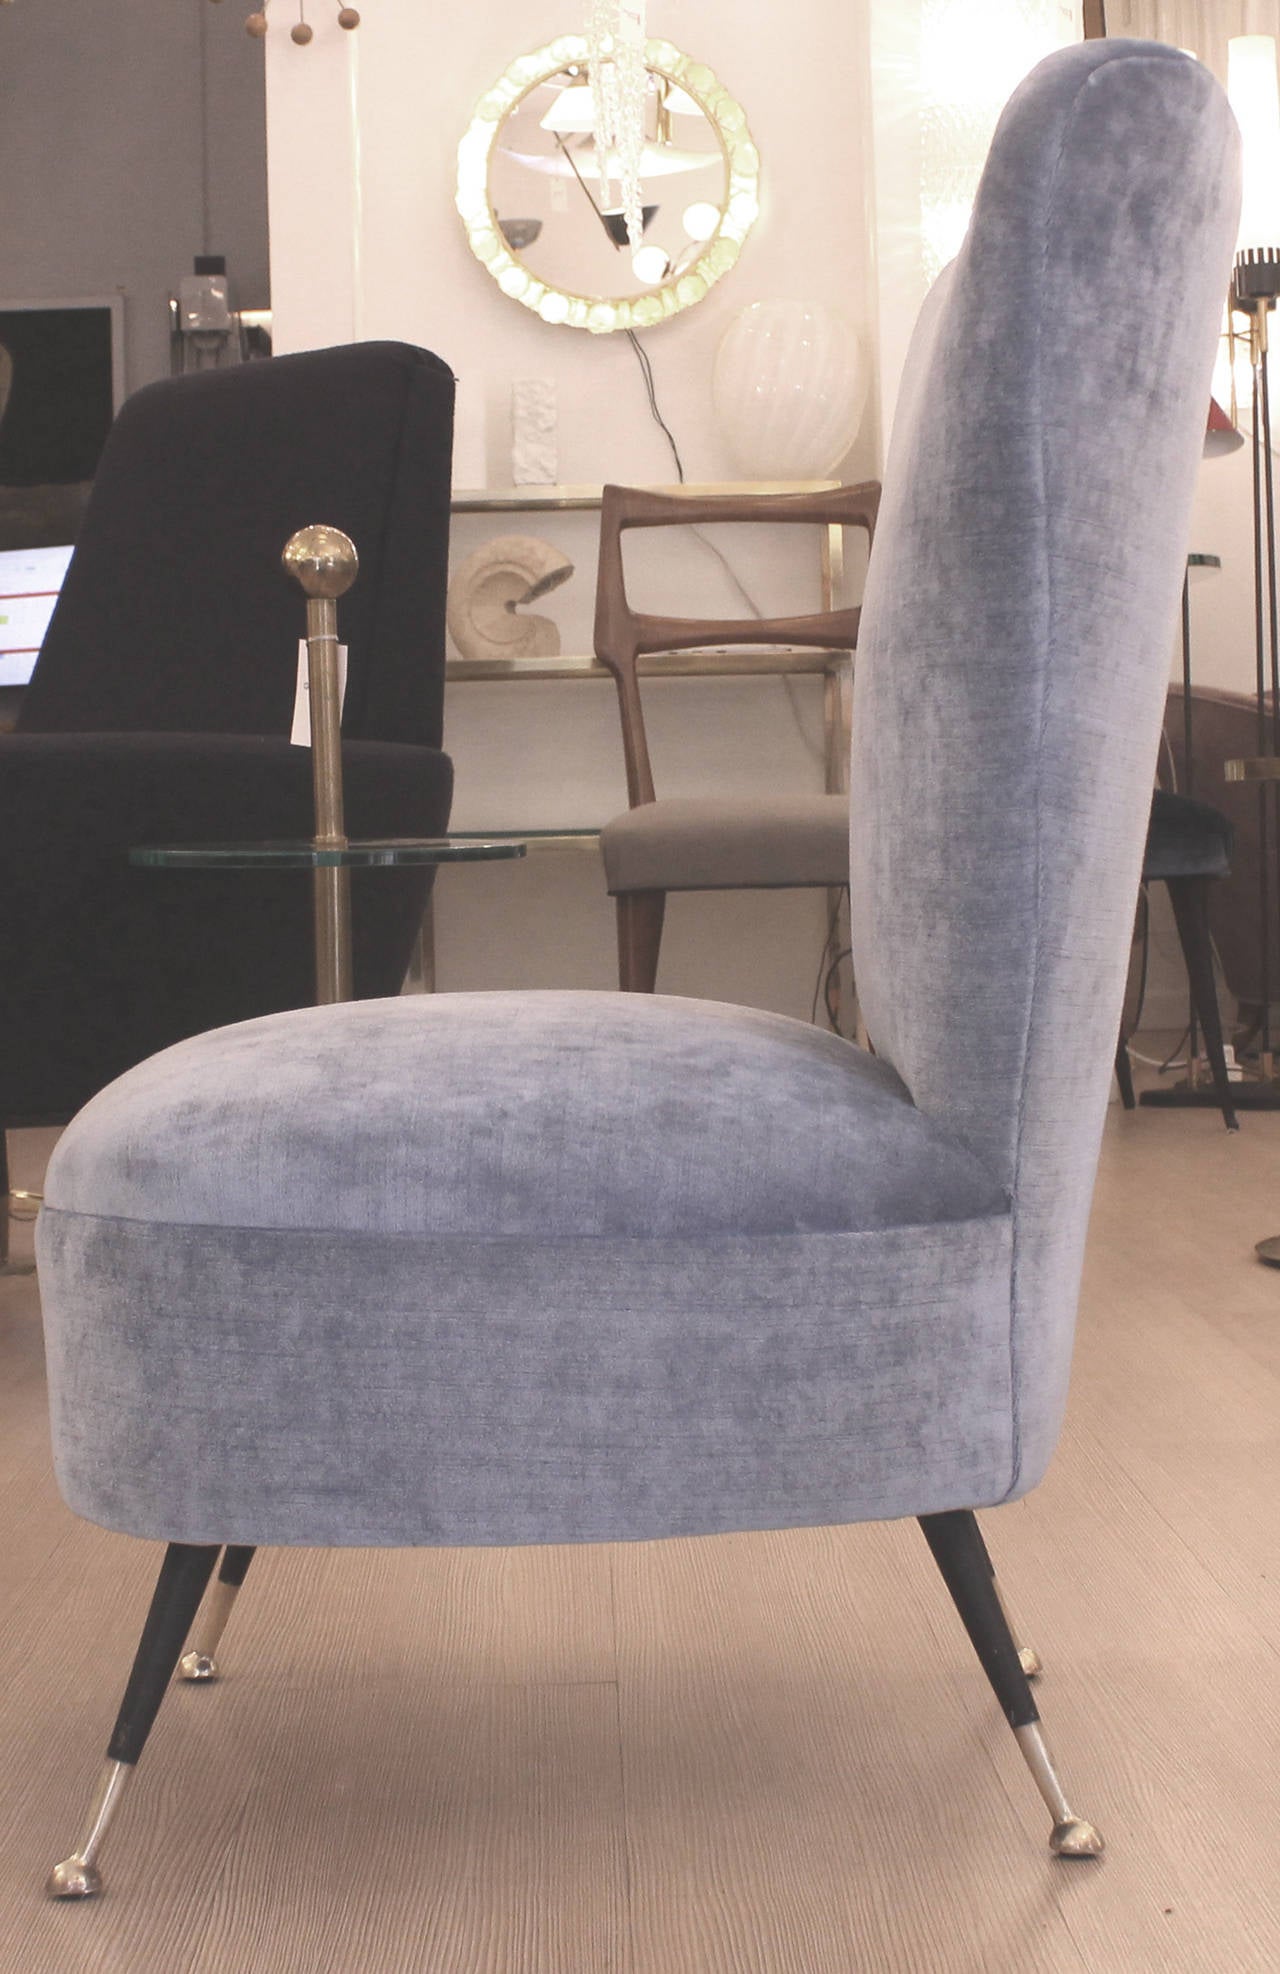 Elegant pair of Italian, 1960s, diminutive slipper chairs. Low seat resting on brass tip legs and regular height back. Perfect for a bedroom as undressing chairs or as additional chairs for a living room. One has been upholstered with the fabric